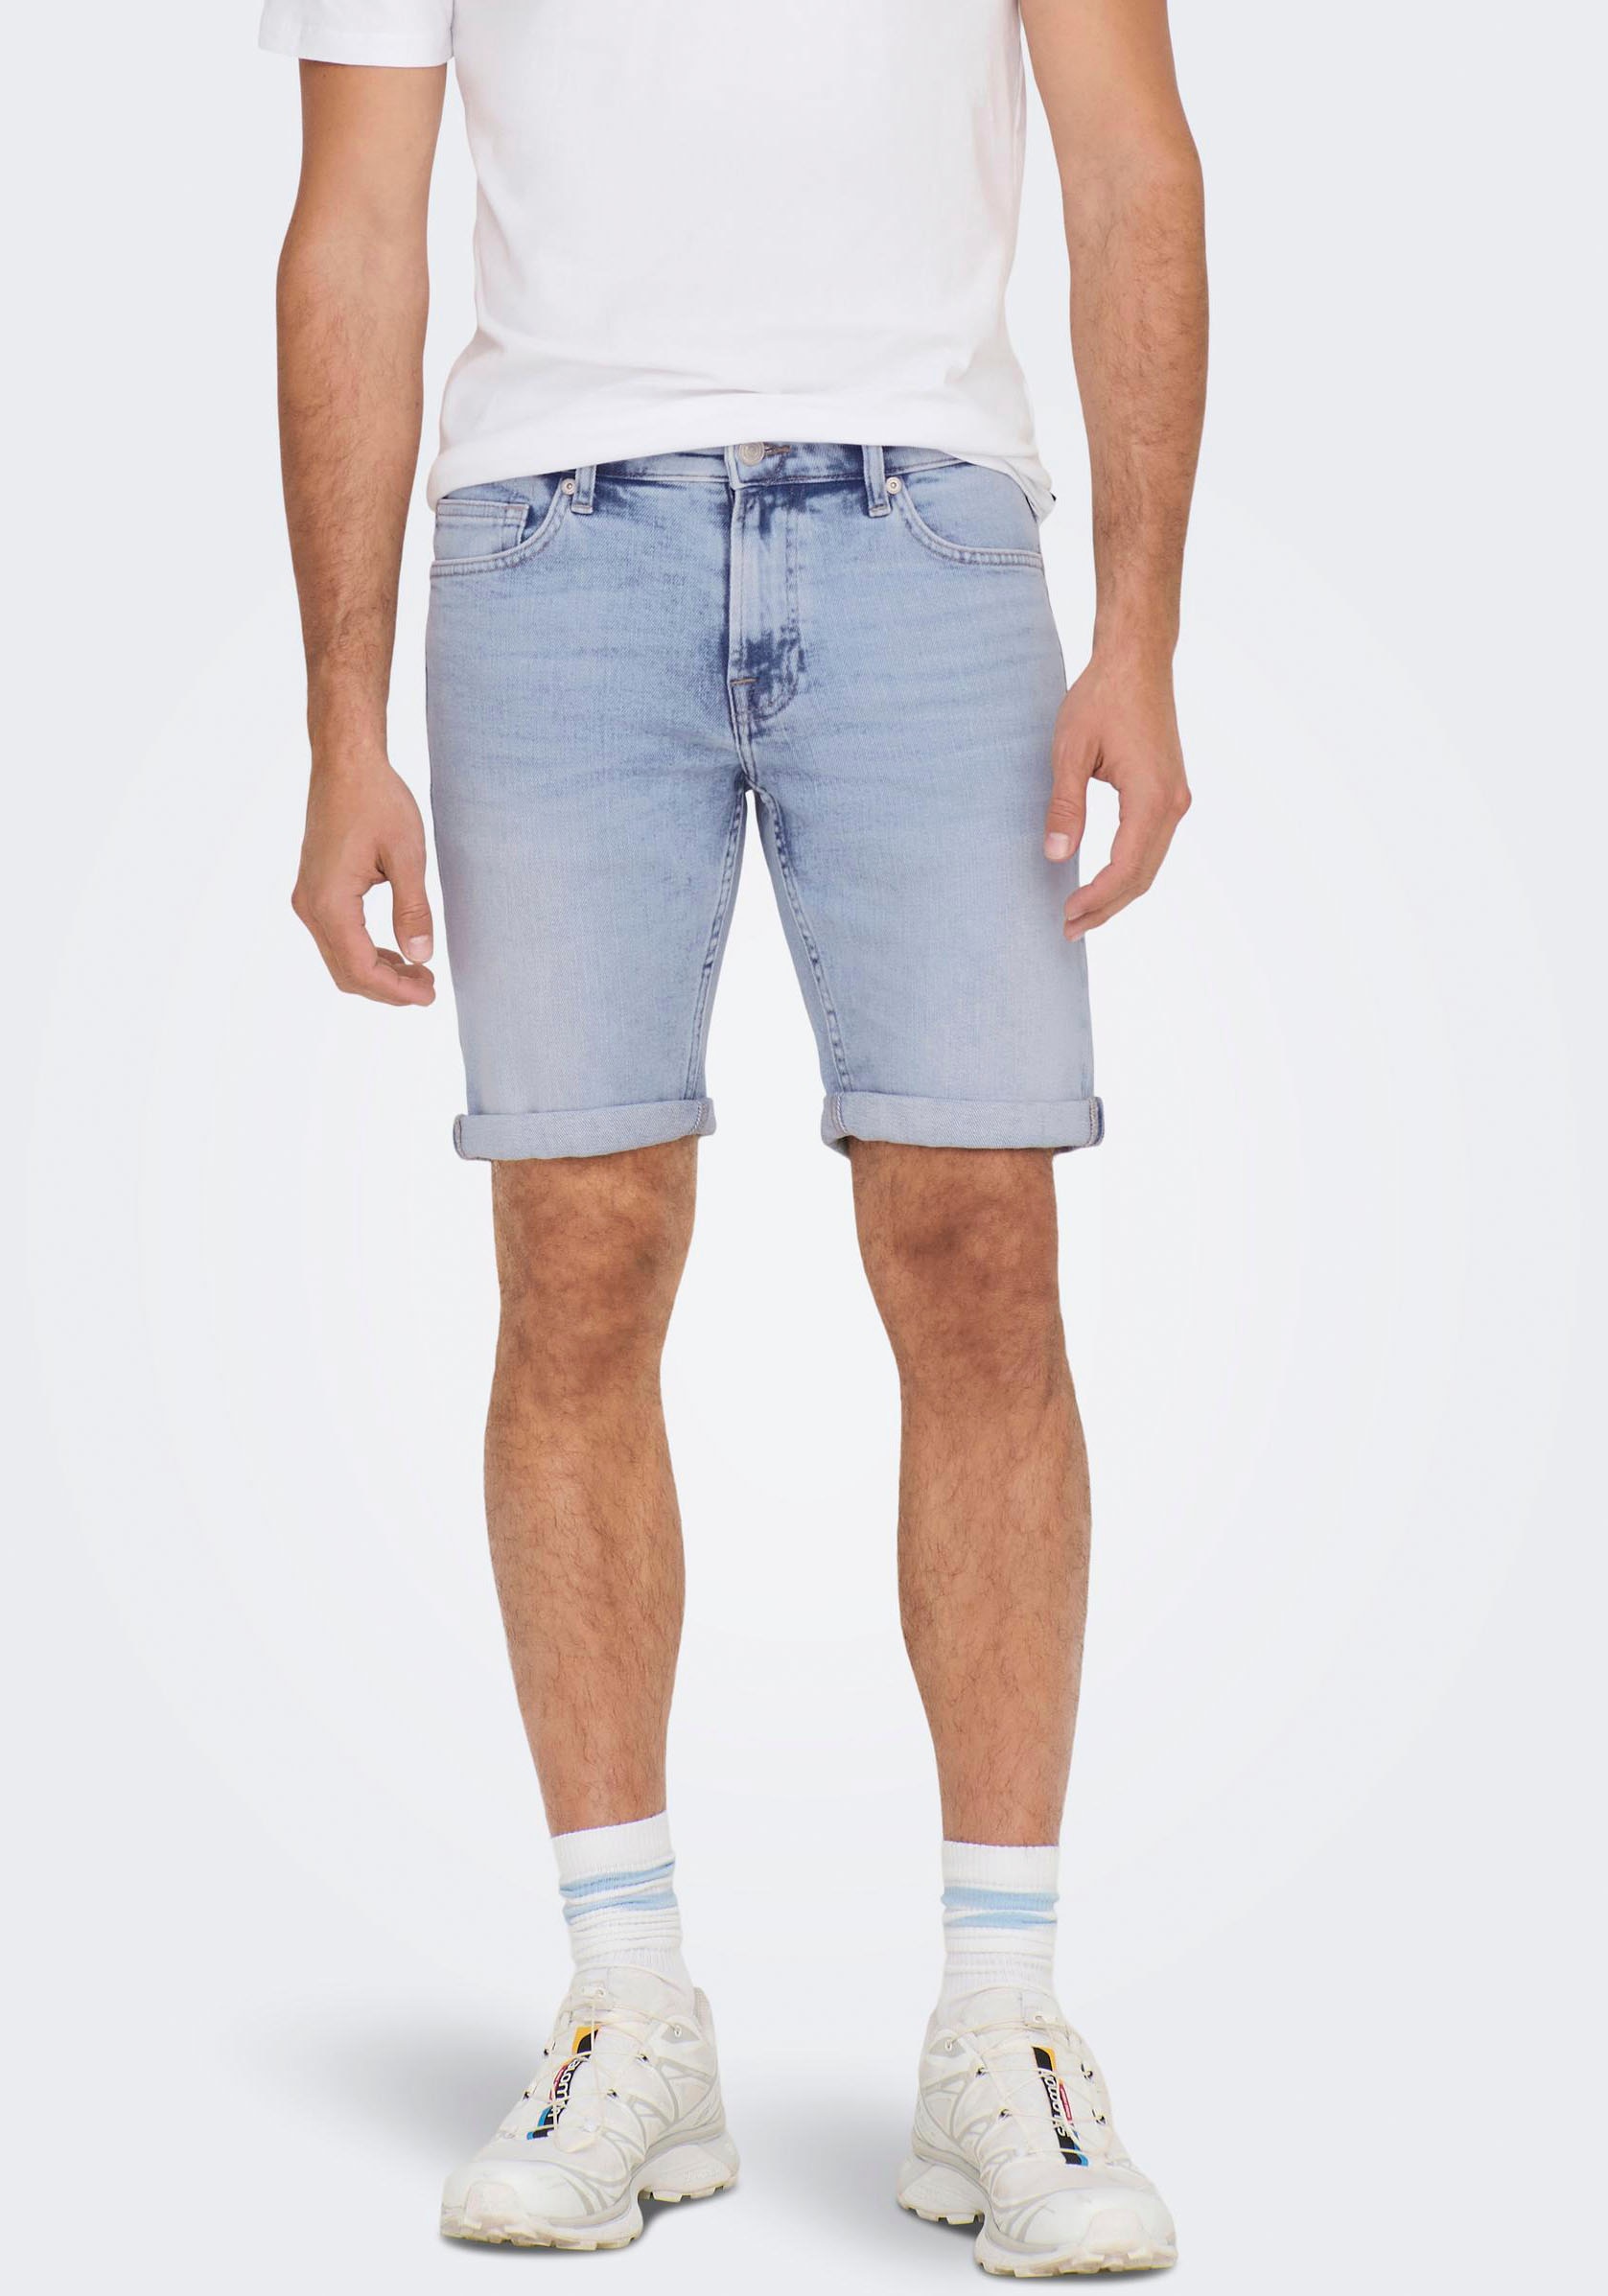 ONLY & SONS Jeansshorts »ONSPLY LIGHT BLUE 5189 SHORTS DNM NOOS« von Only & Sons